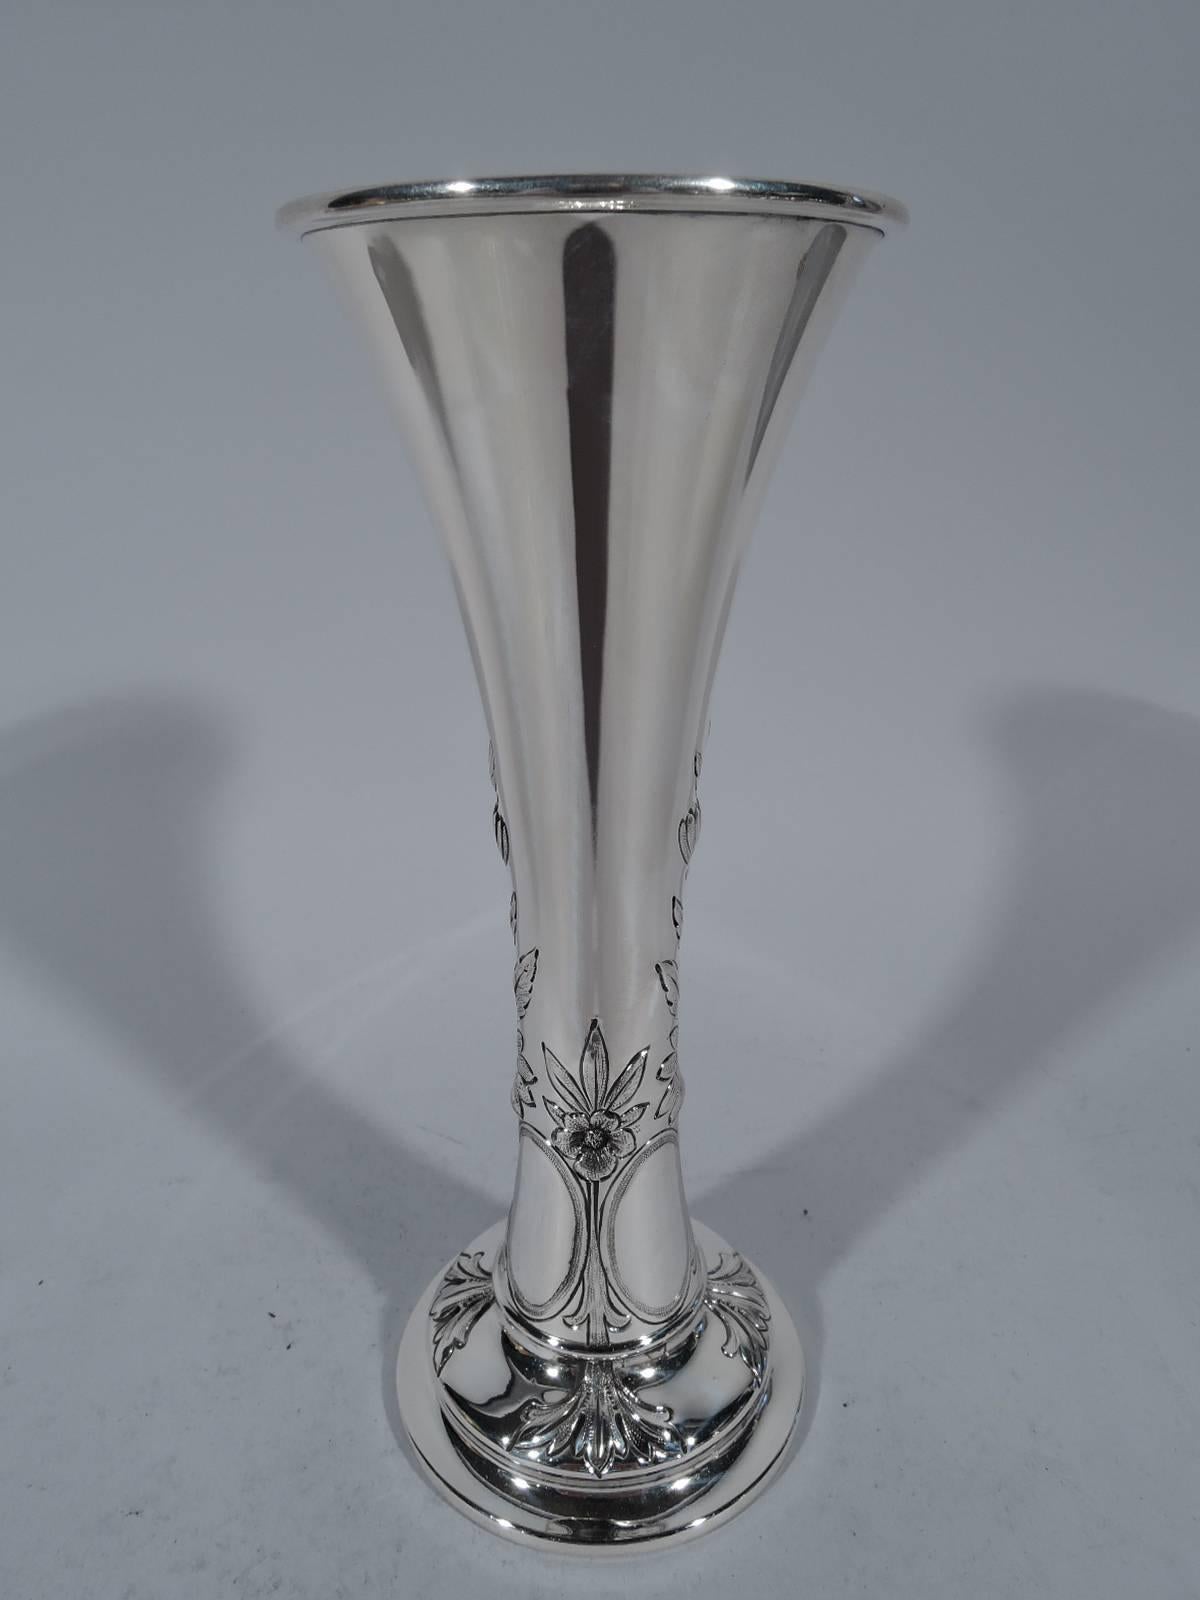 Edwardian sterling silver vase. Made by Whiting in New York in 1911. Tapering cylinder on stepped round foot. Chased vertical ornament in form of flowers and oval frames (vacant). Hallmark includes date symbol and no. 891. Weighted.